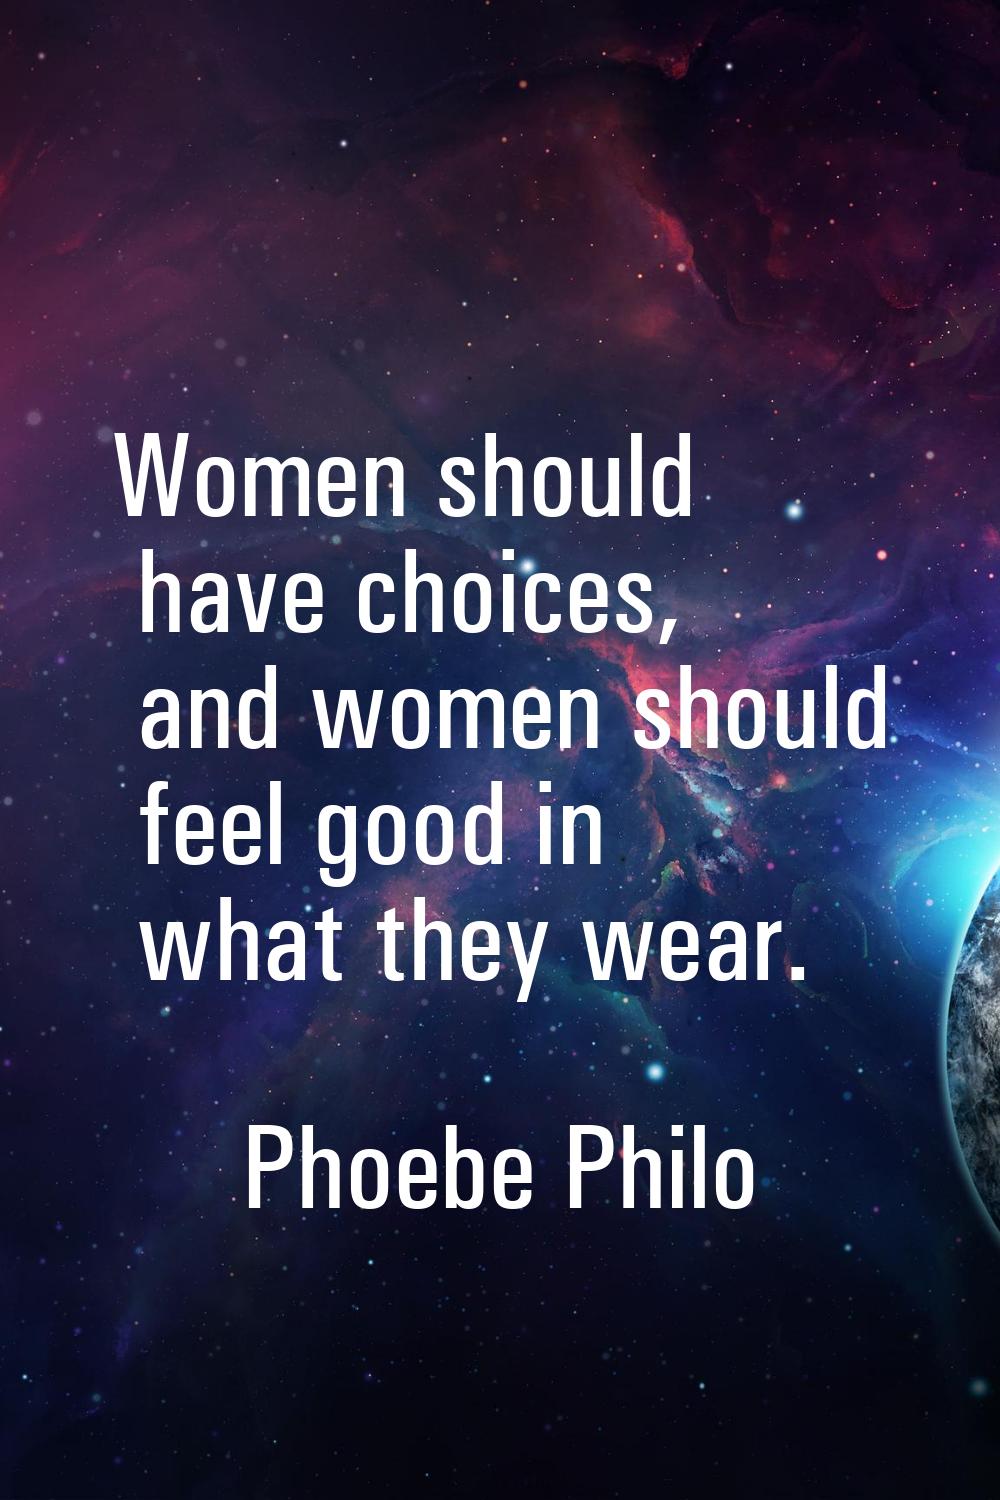 Women should have choices, and women should feel good in what they wear.